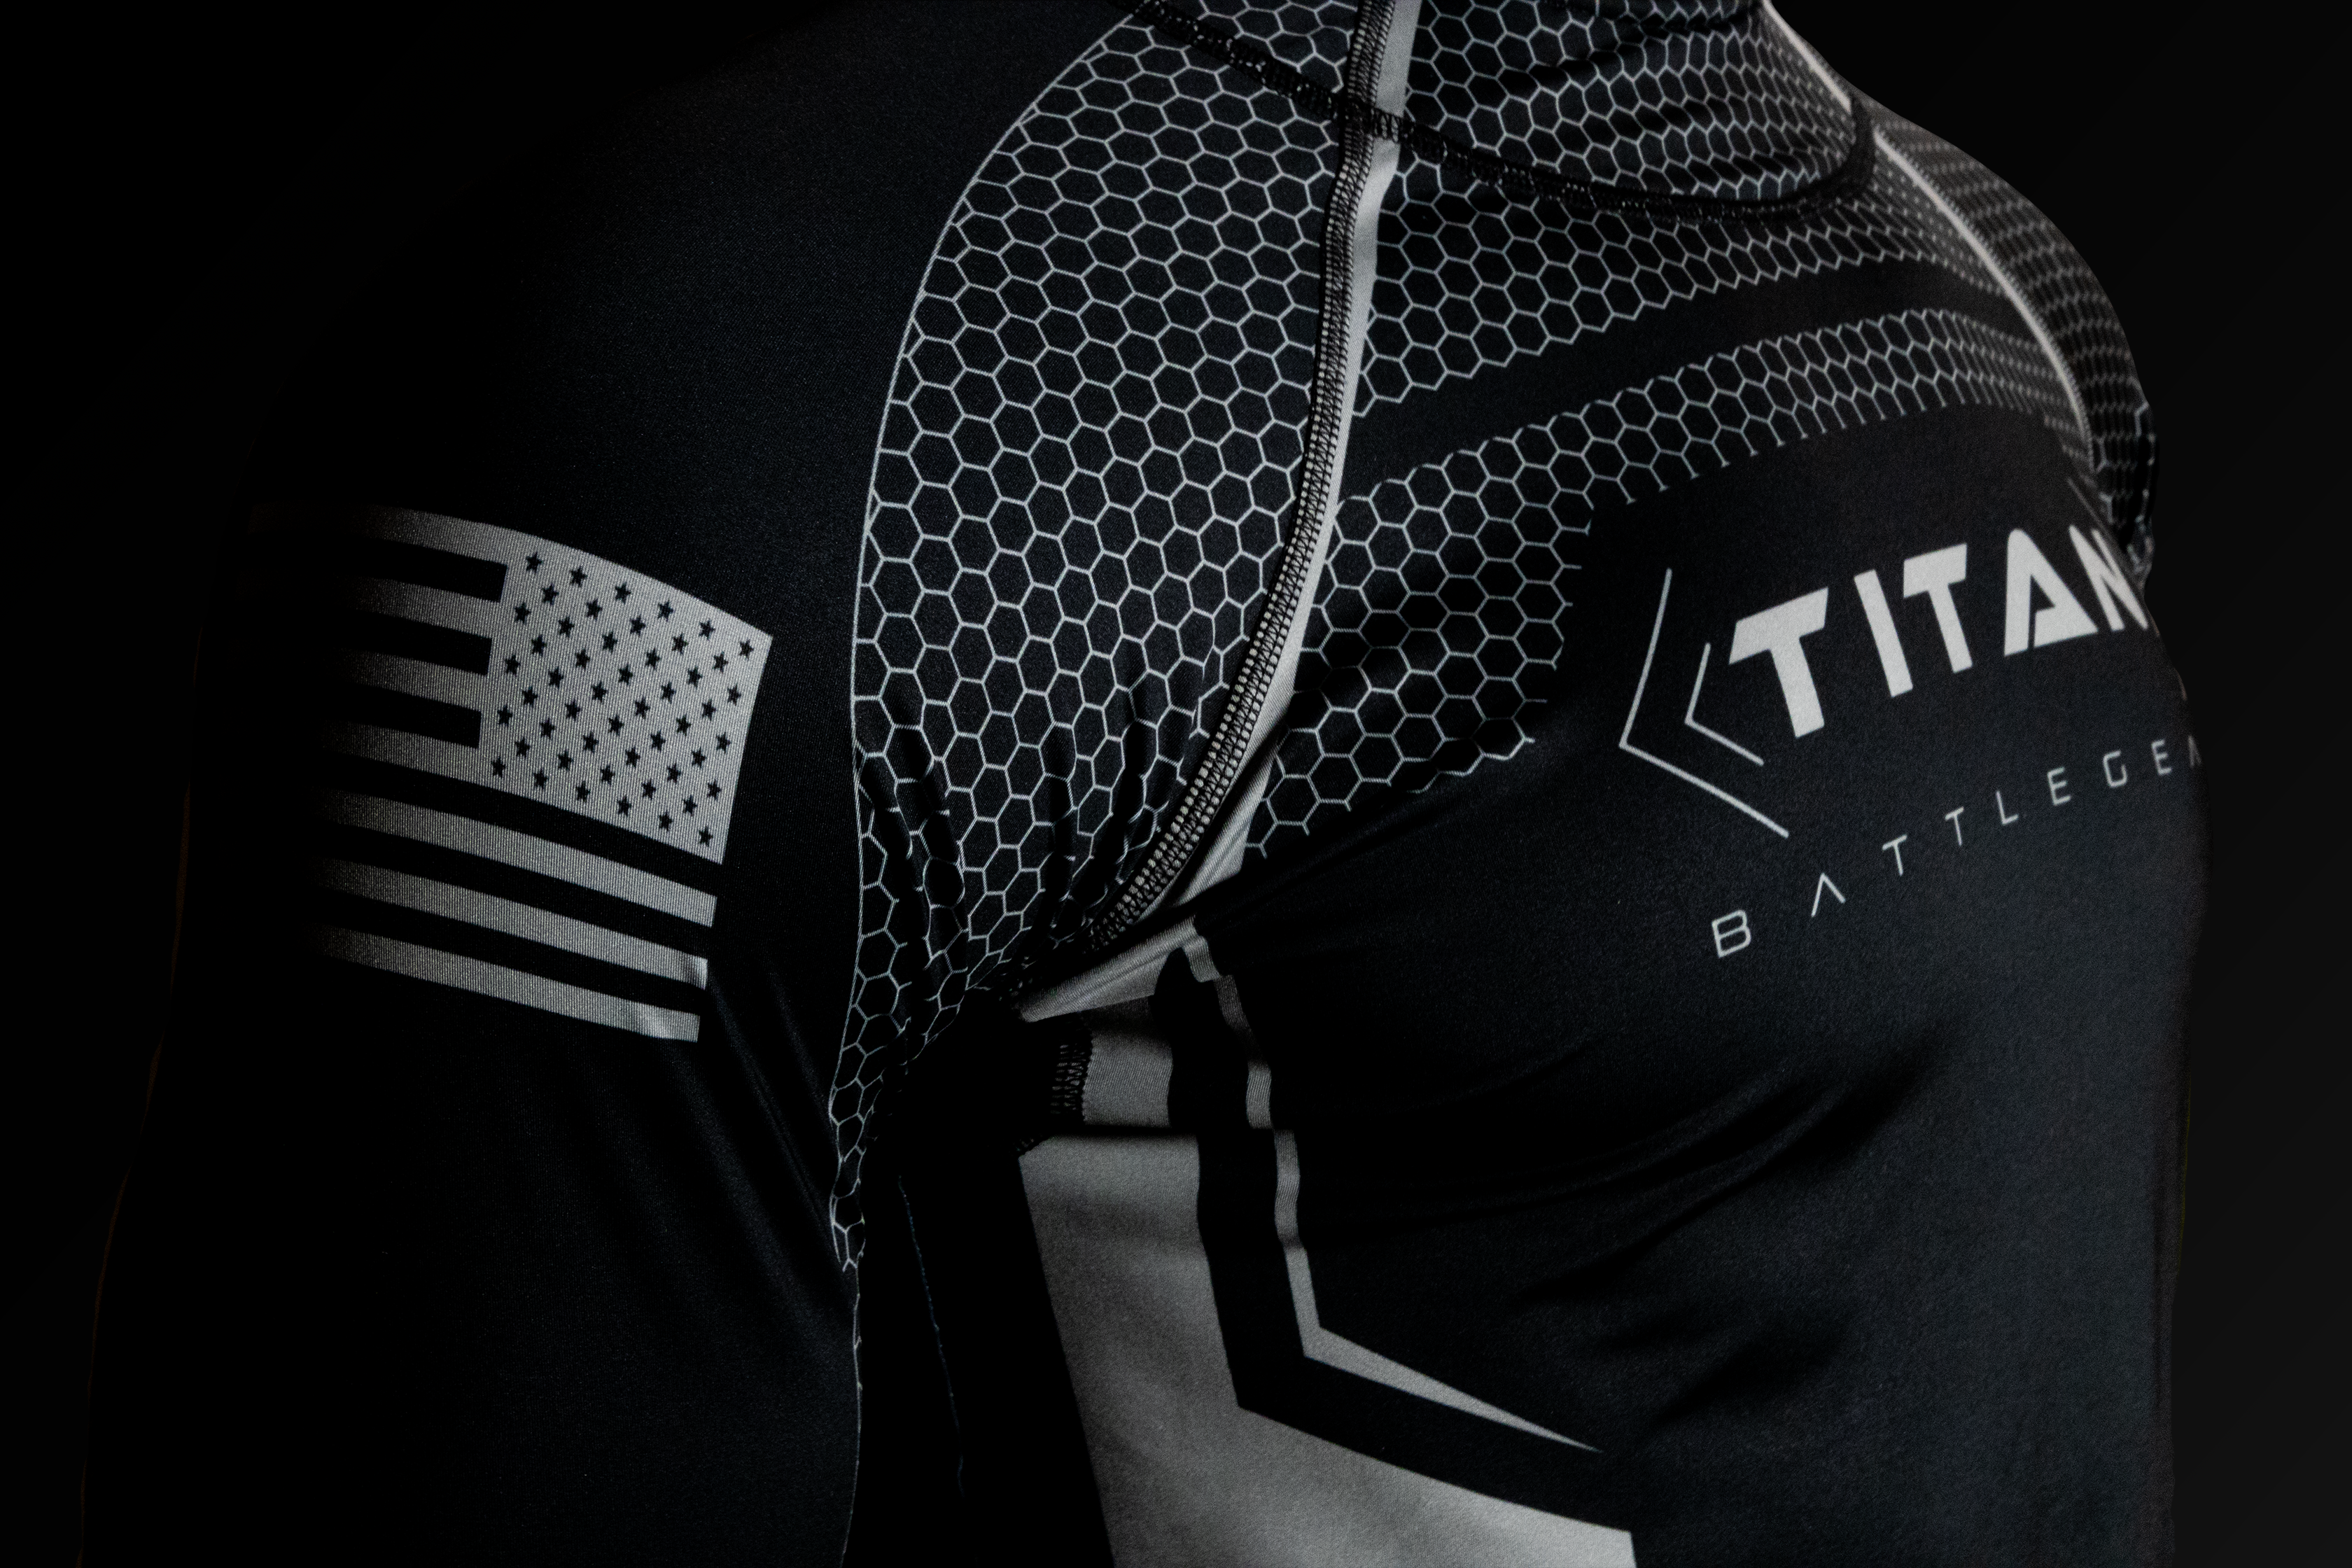 Close-up of a Titan BattleGear hockey neck guard shirt, showcasing the detailed hexagonal pattern and the Titan logo on the chest. The sleeve features an American flag design, emphasizing the shirt's craftsmanship and durability.